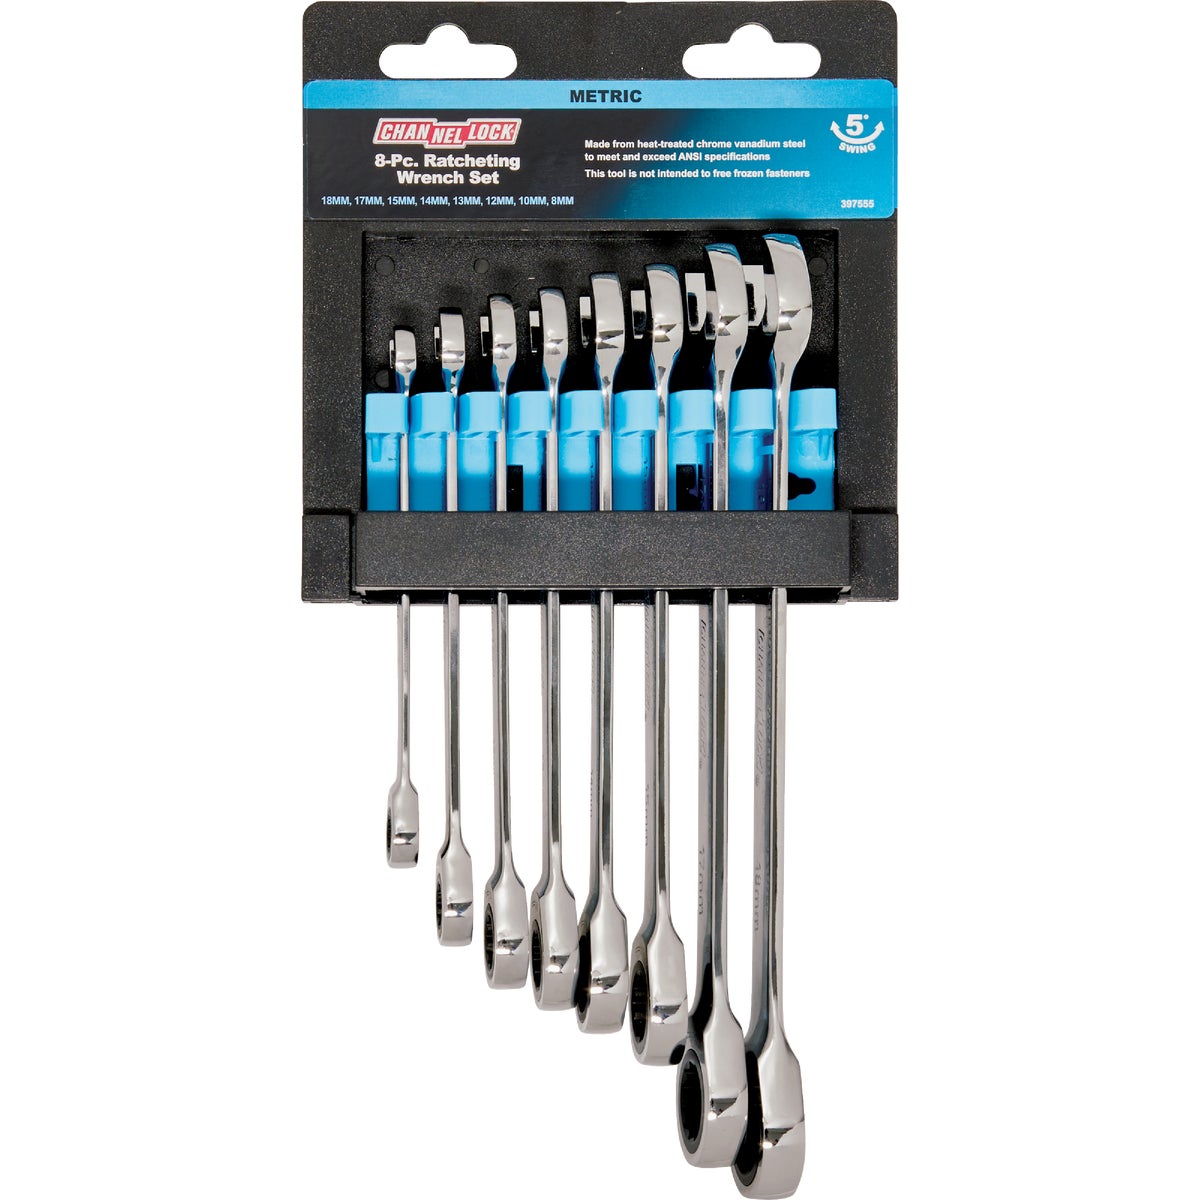 Item 397555, This 8-piece combination wrench set combines the features of a combination 